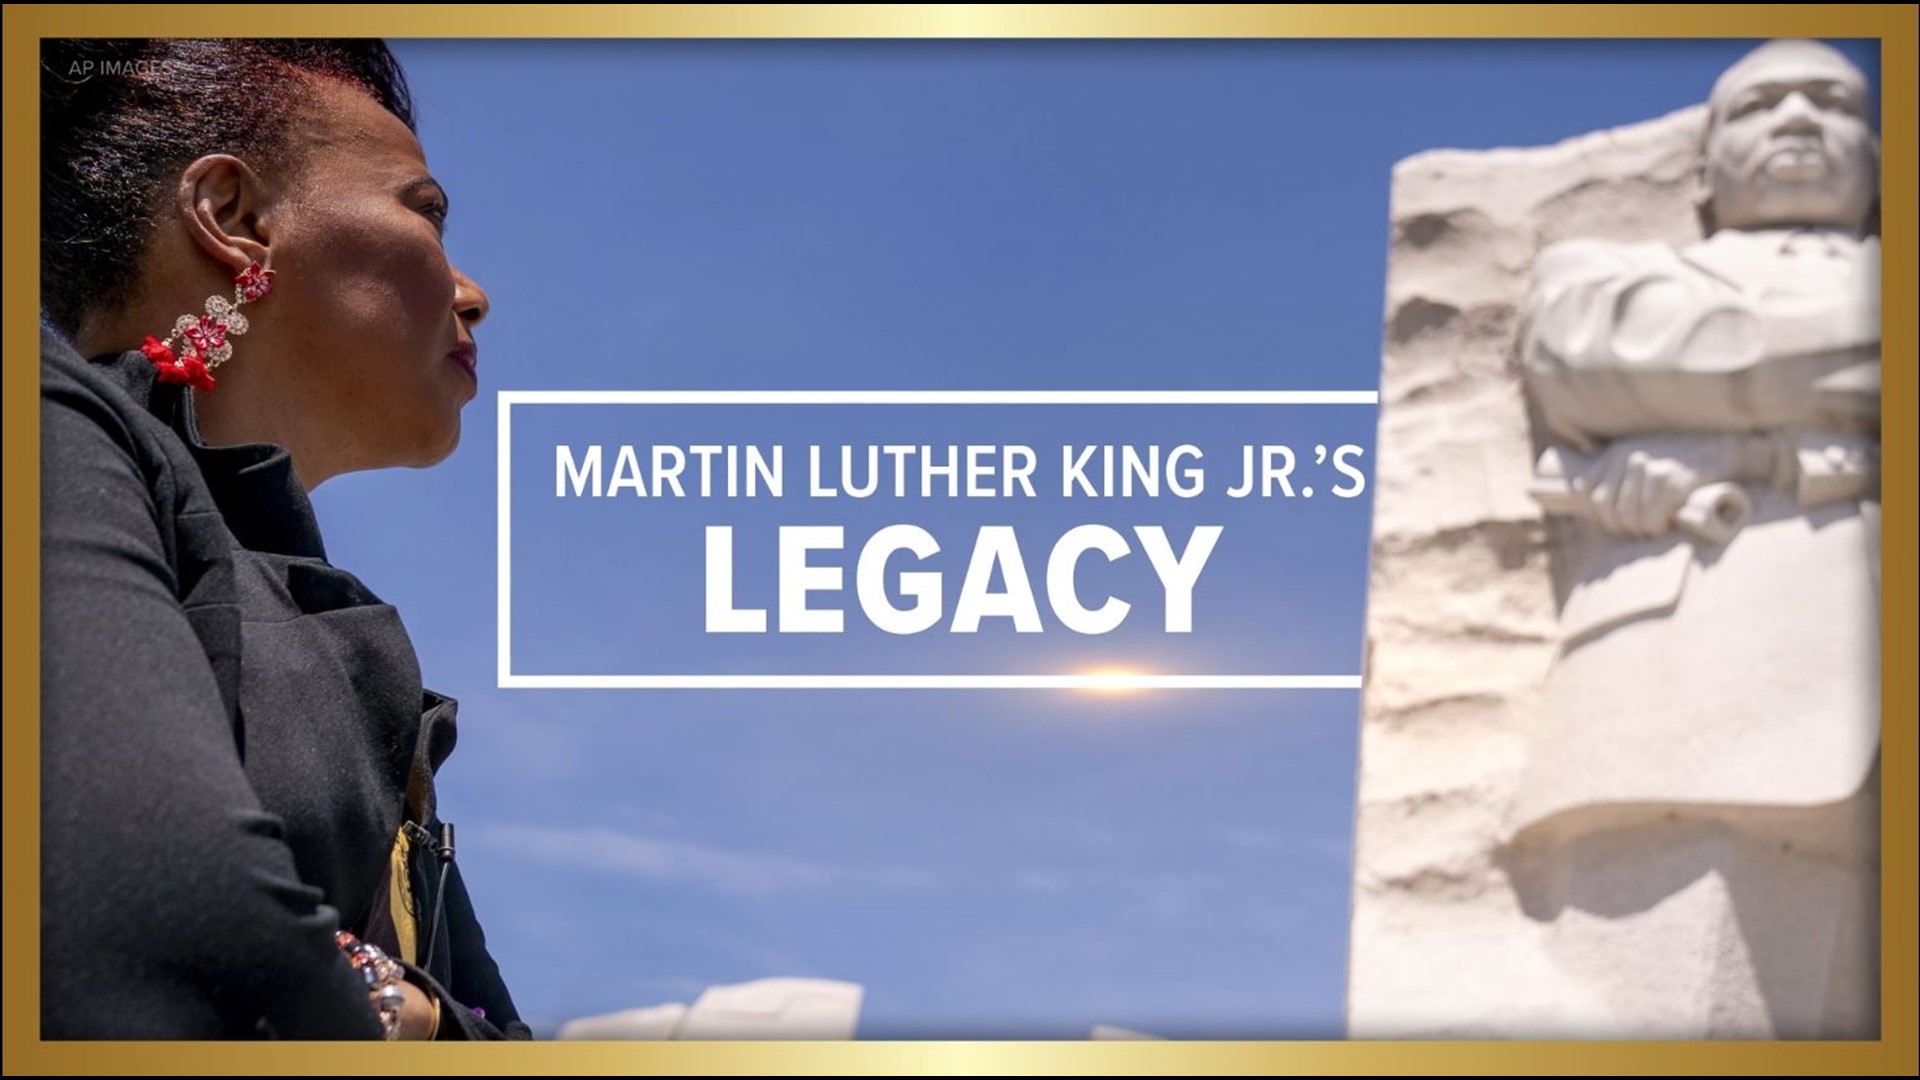 This Martin Luther King Jr. Day we are taking a look back at his big moments for civil rights, exploring his legacy and discussing the changes still needed today.